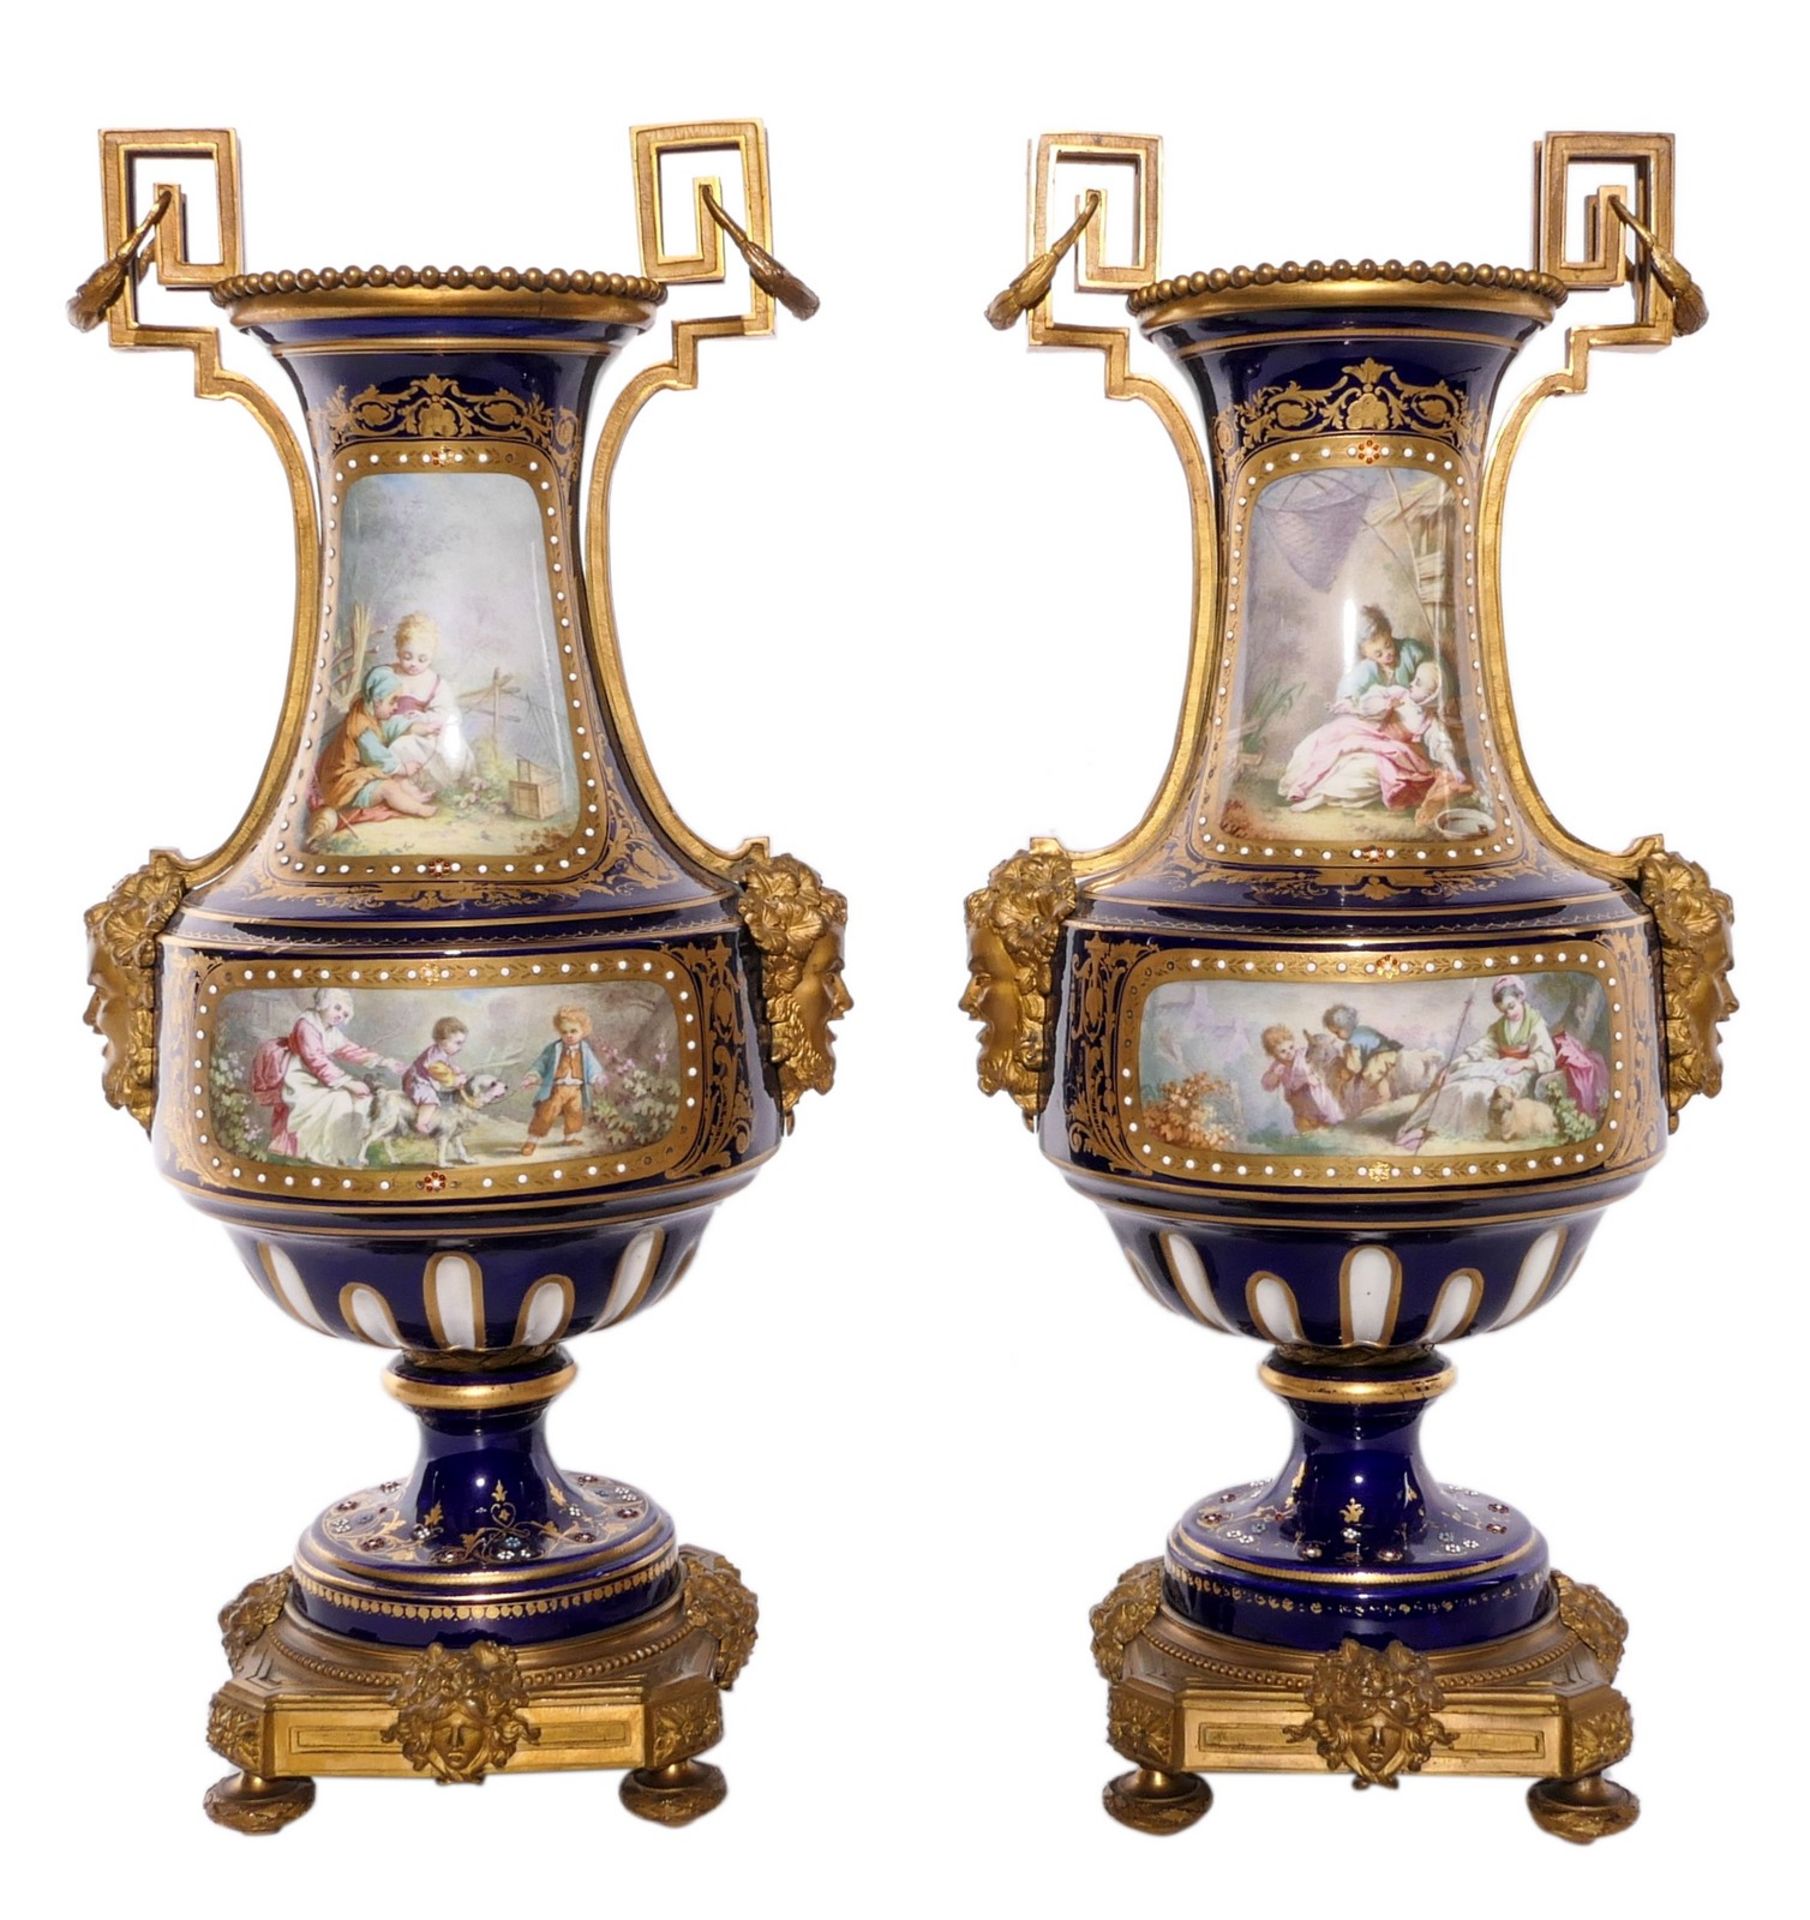 A pair of Neoclassical vases in Sèvres-porcelain, blue royale ground, the front with gilt cartouches